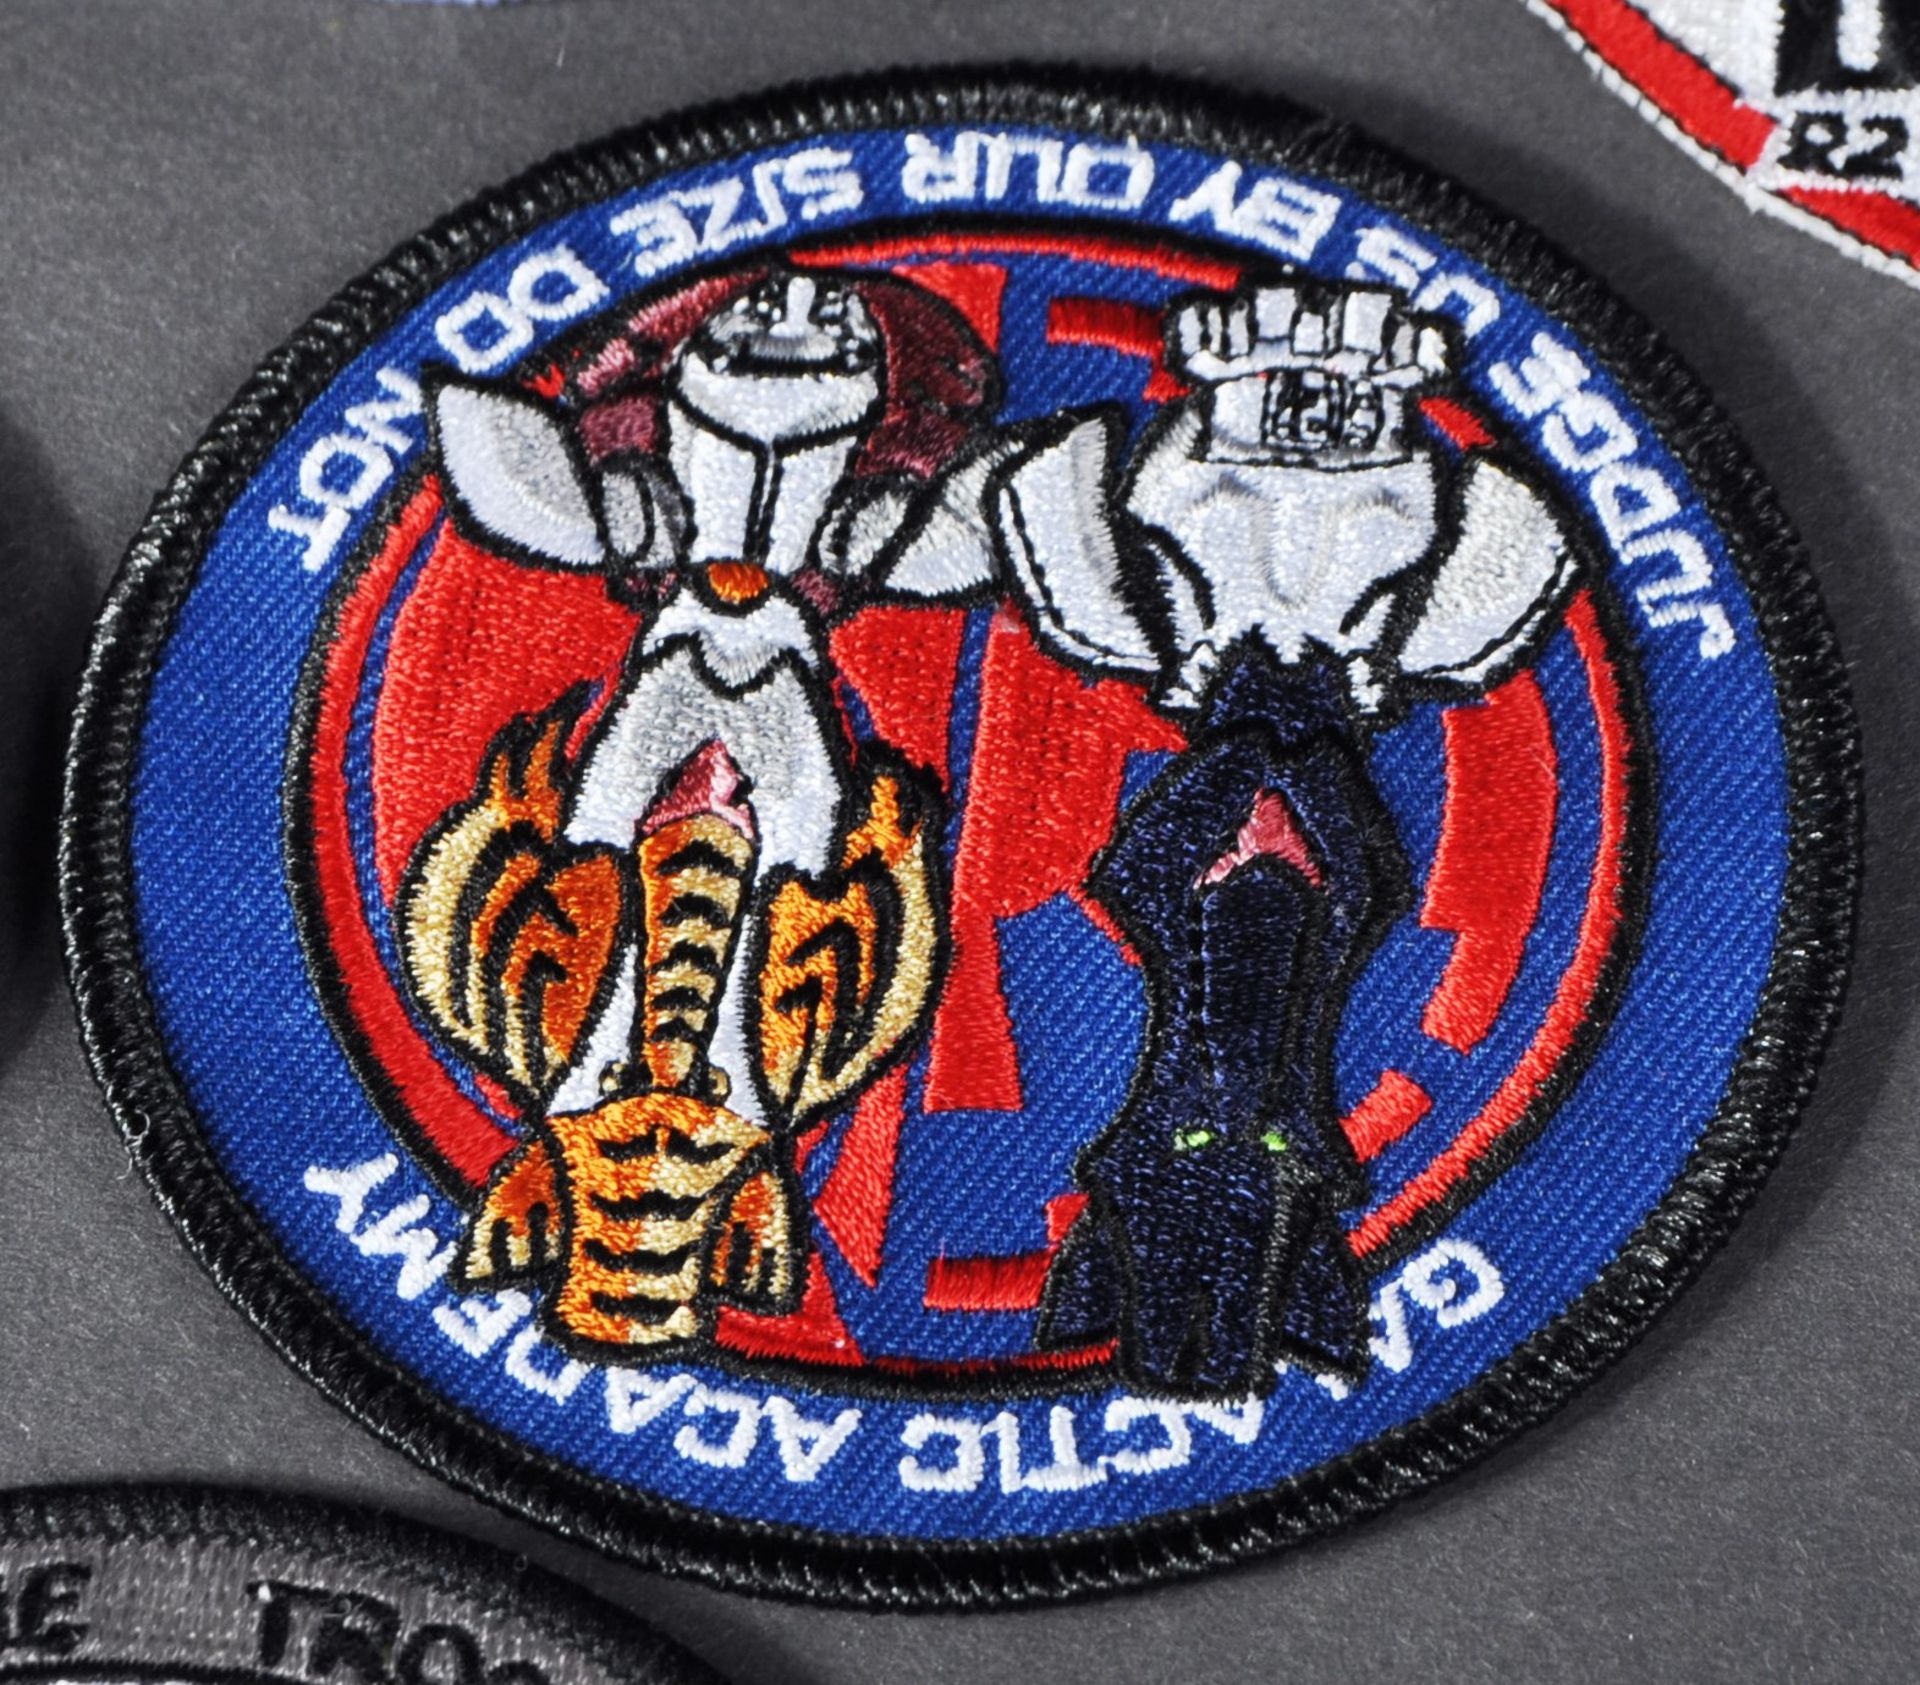 ESTATE OF JEREMY BULLOCH - STAR WARS - CLOTH PATCHES - Image 8 of 8